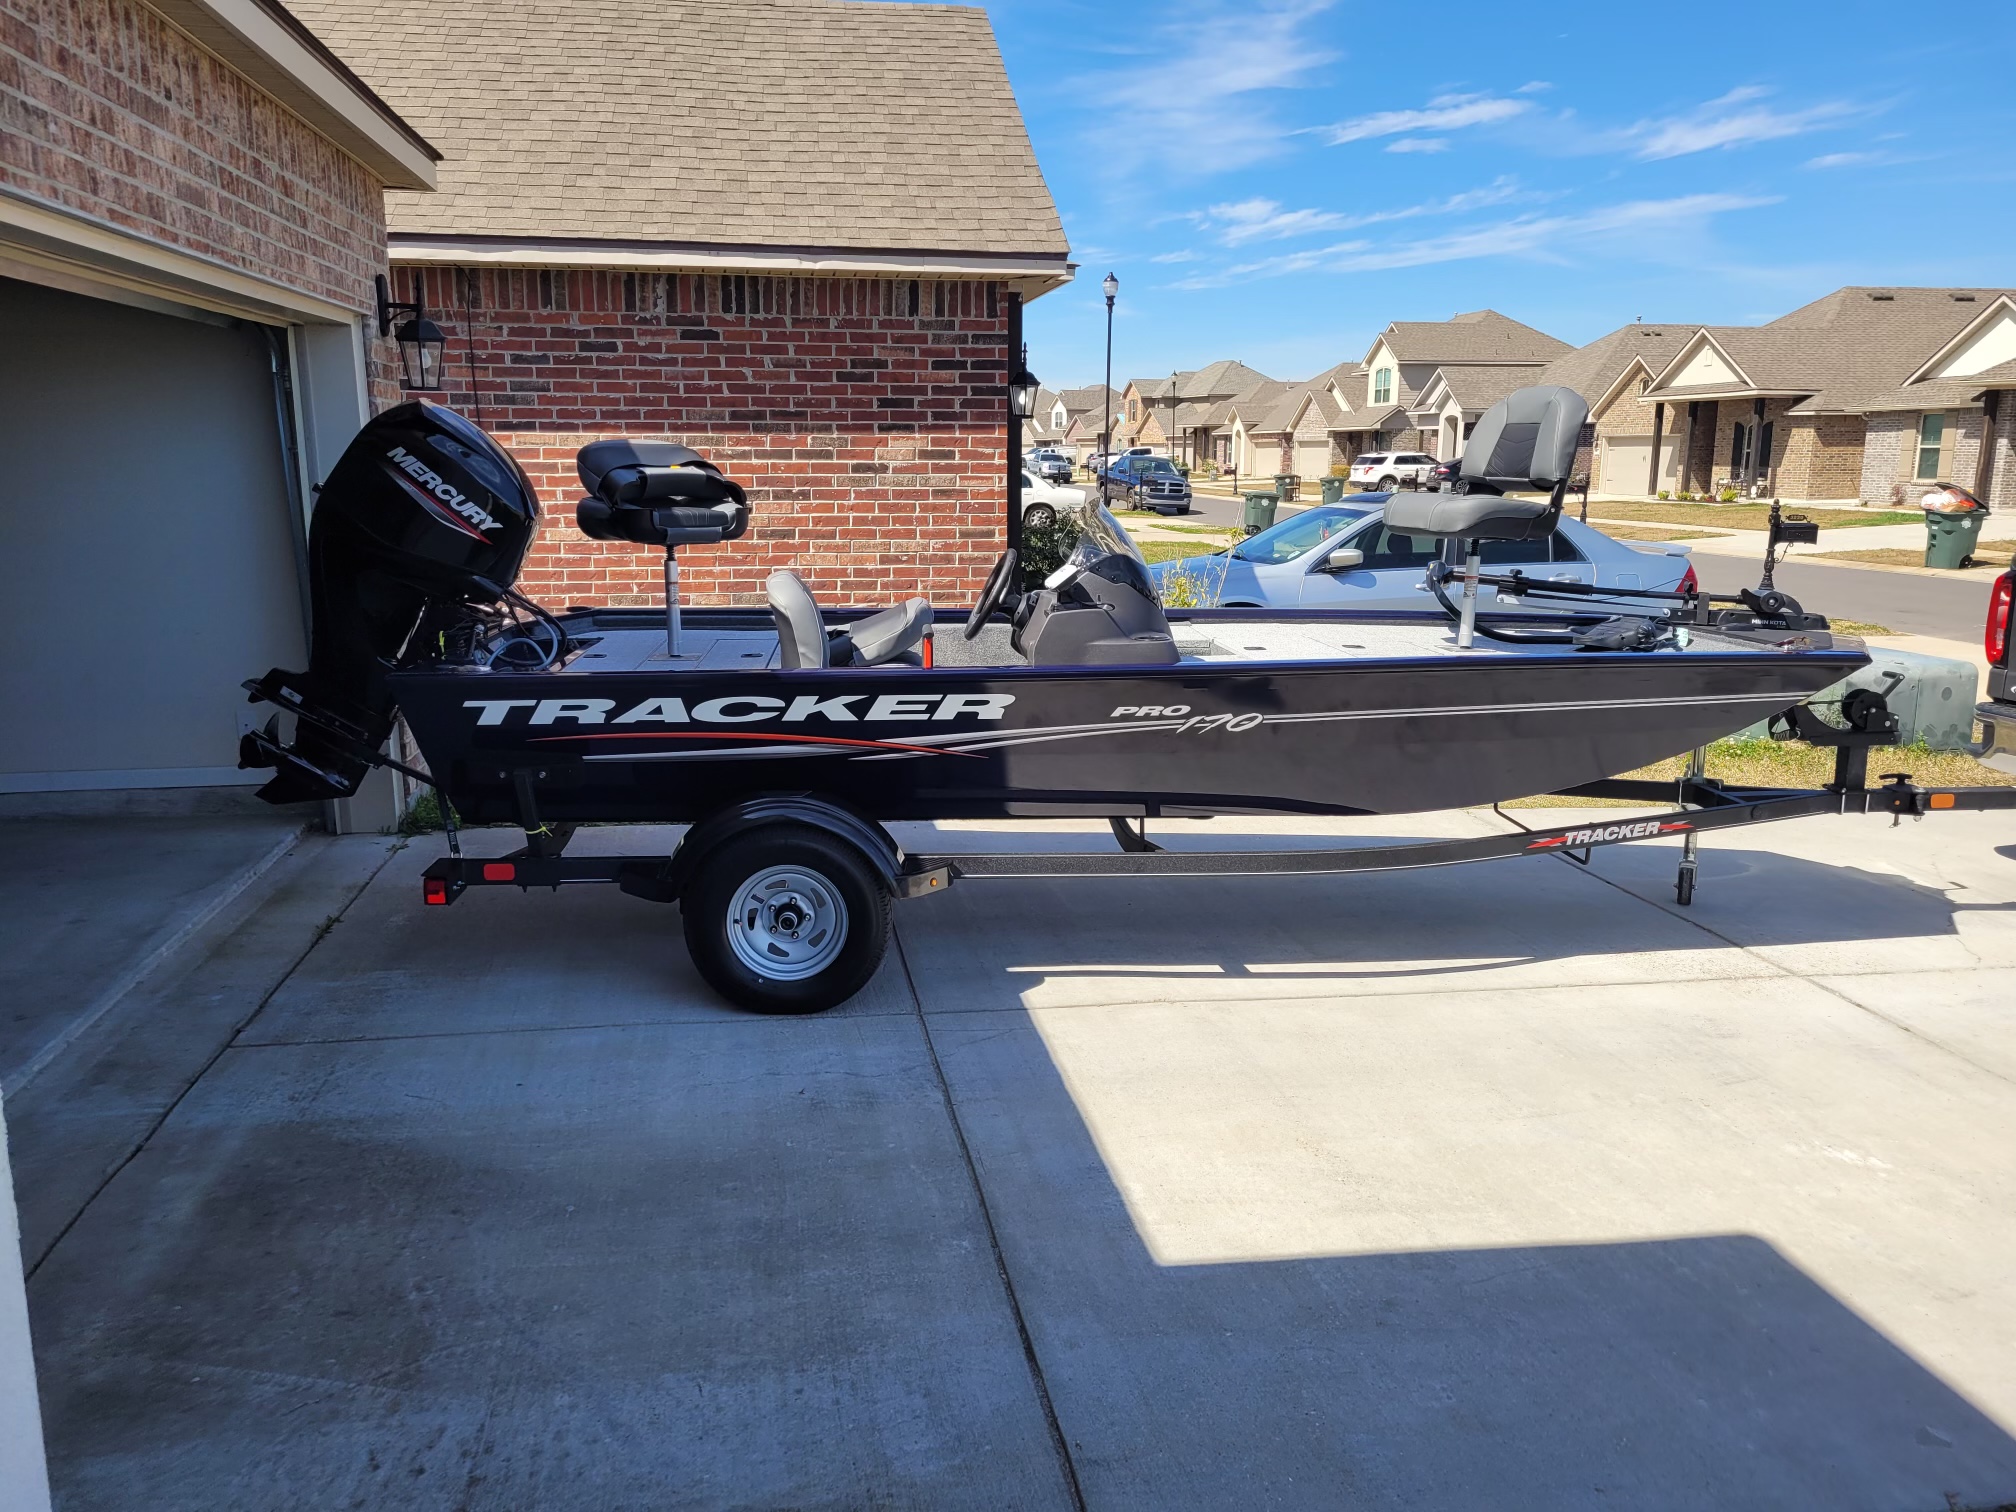 2022 Tracker Pro 170 Fishing boat for sale in Lake Charles, LA - image 1 